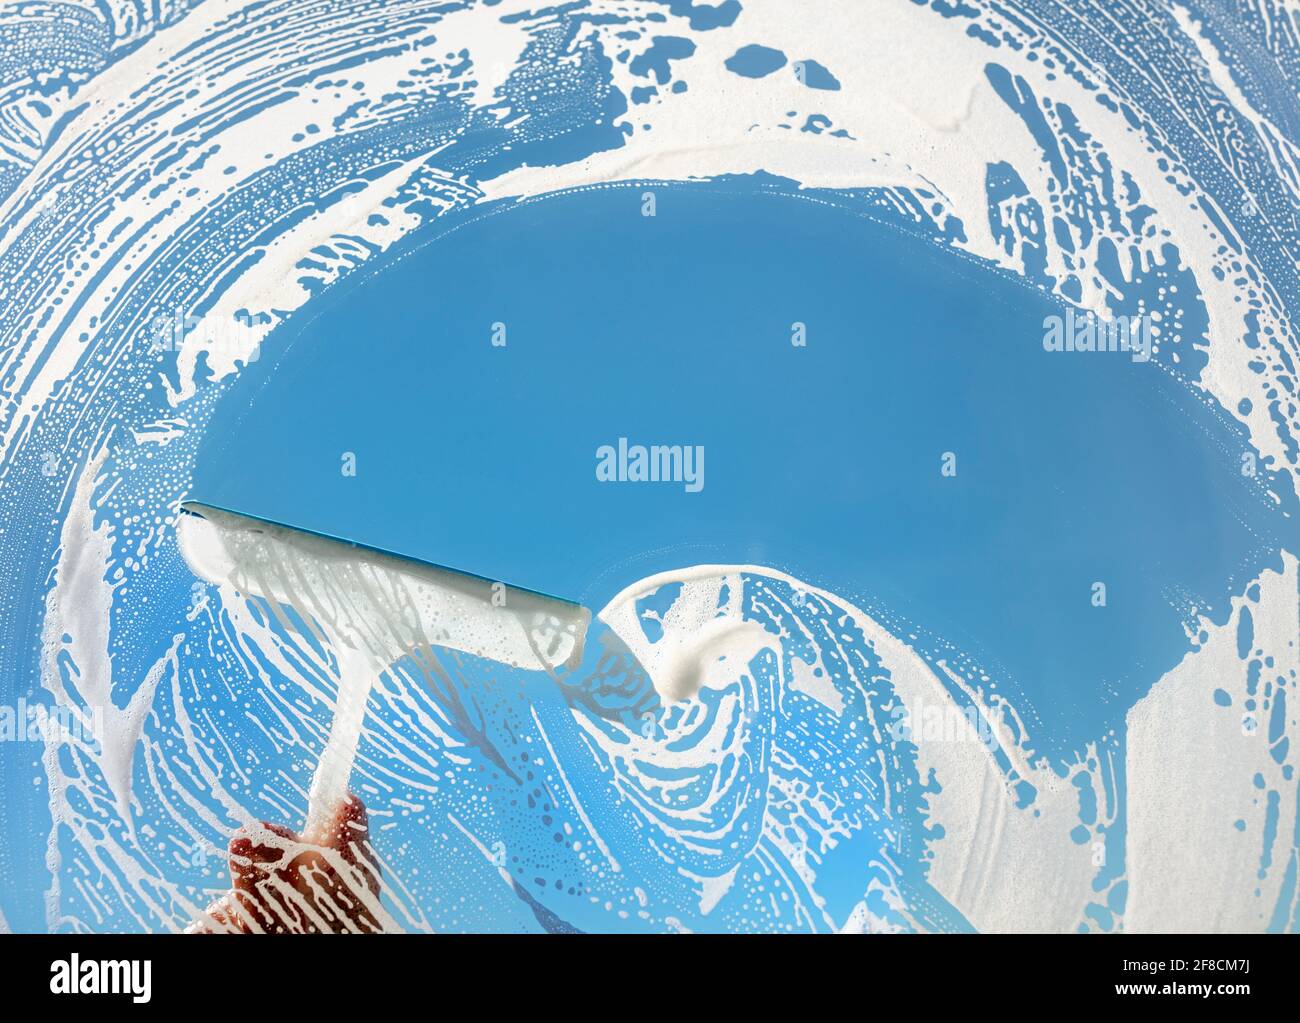 Window cleaner using a squeegee to wash a window with clear blue sky Stock Photo